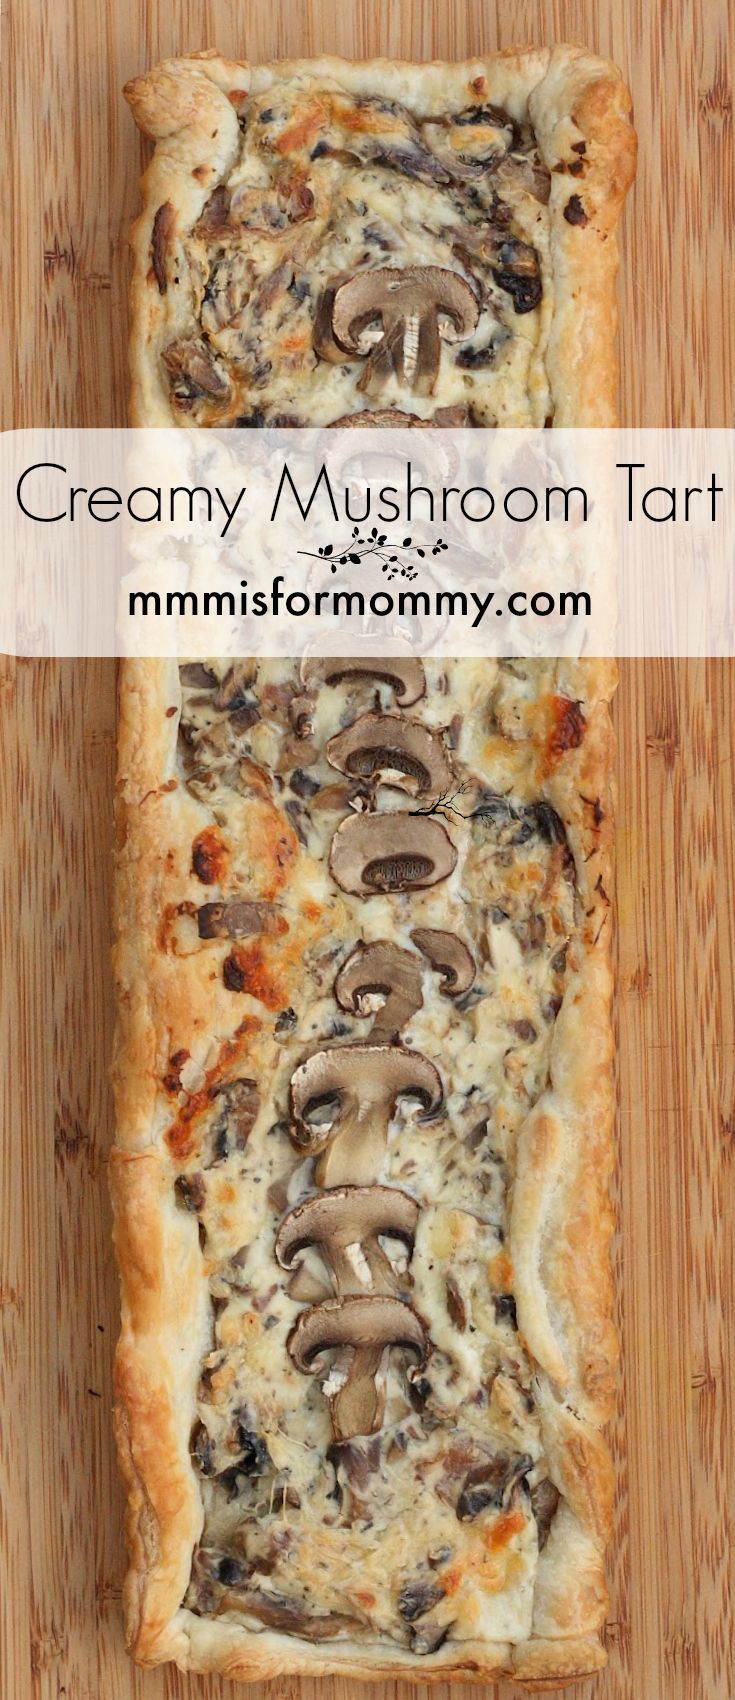 Creamy Mushroom Tart – Fast and delicious using store-bought puff pastry. Meal or appy from Mmm… is